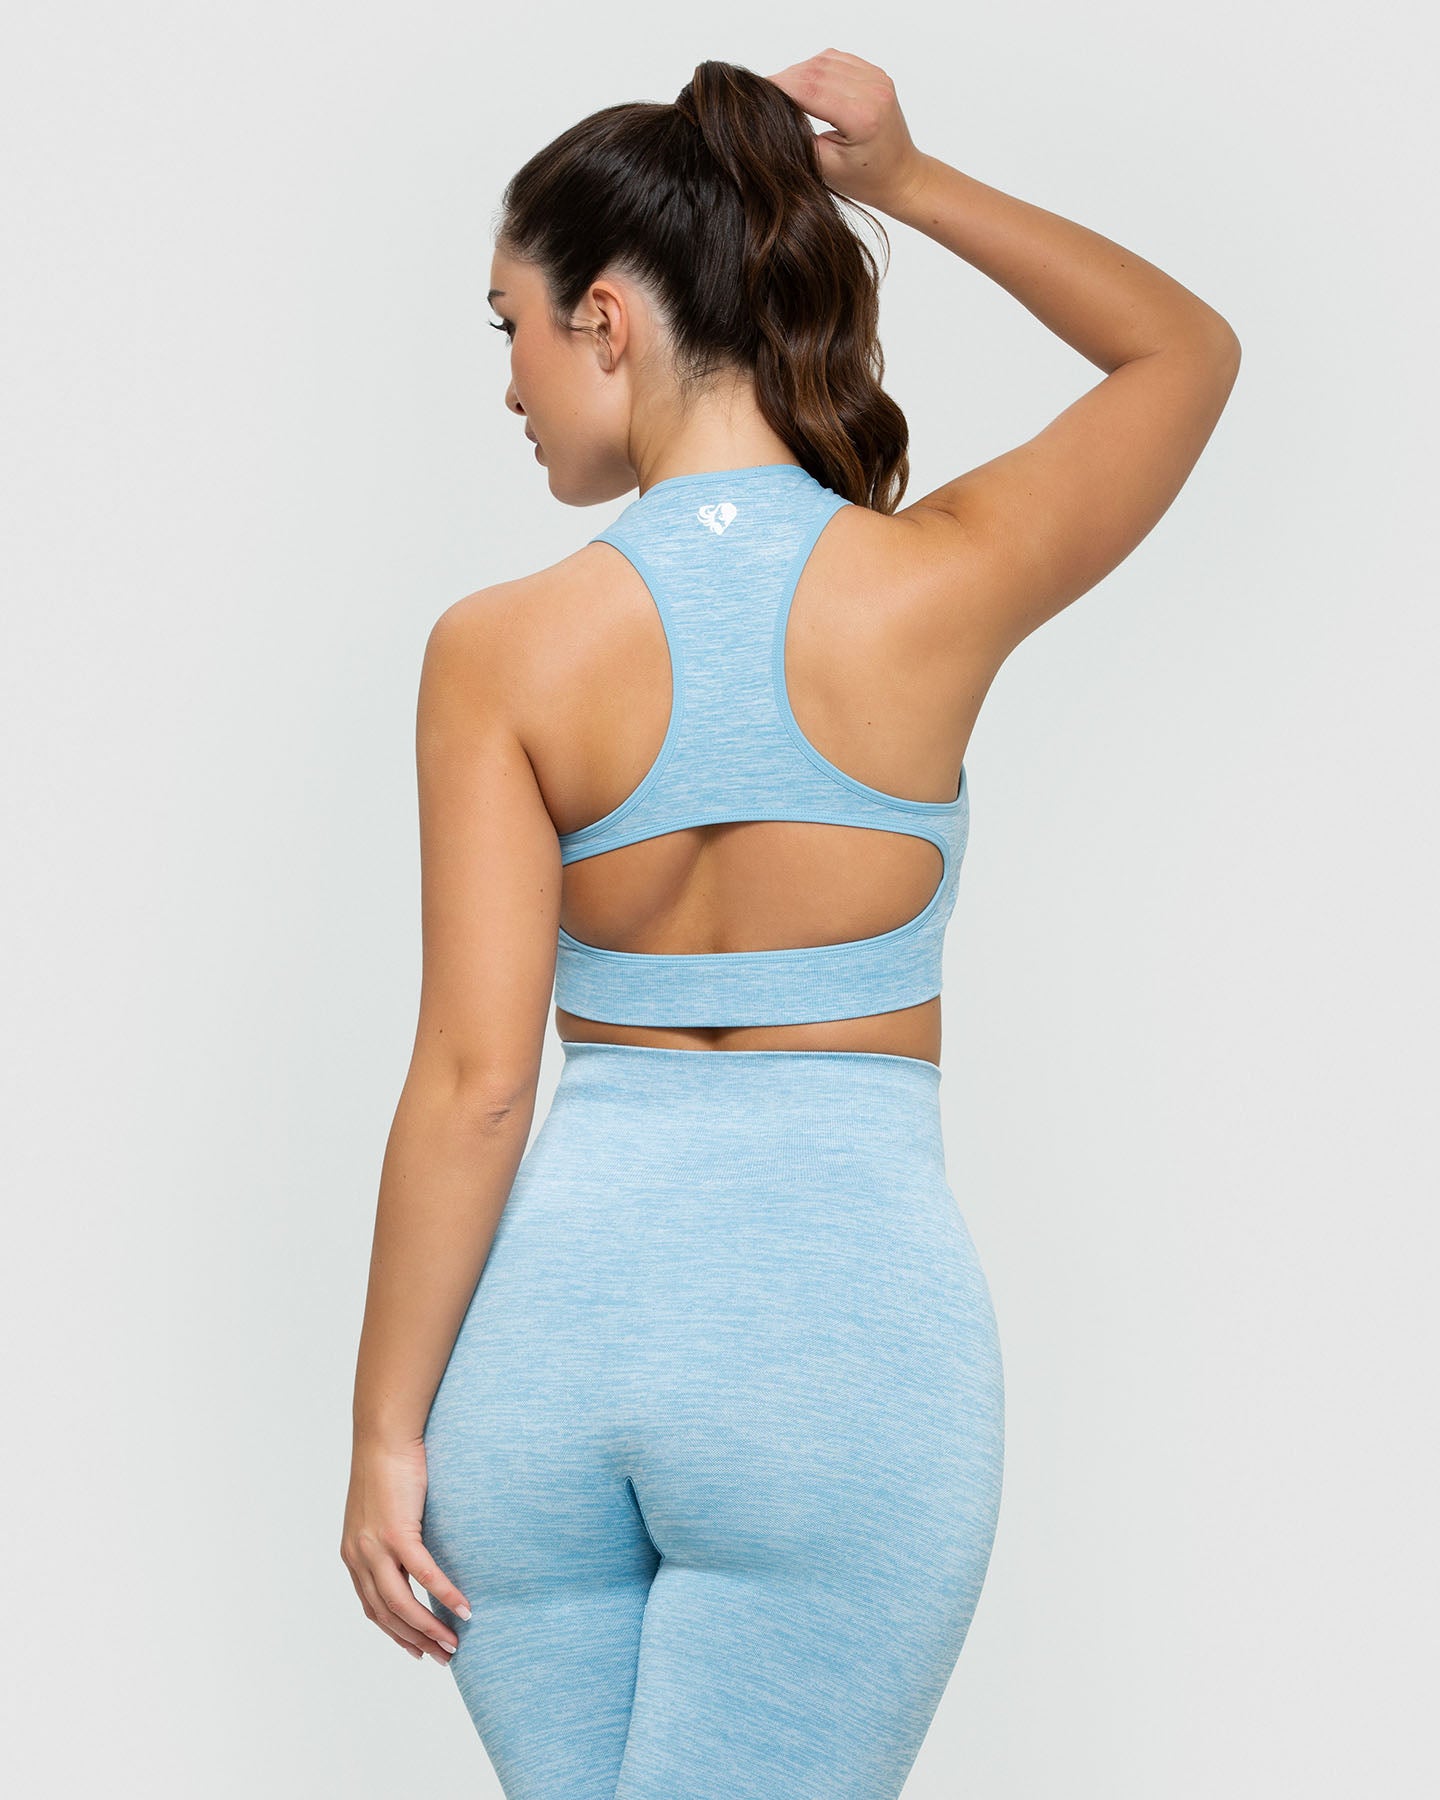 Women's Best - Dress to impress 😍 Jump into your favorite sportswear of  Women's Best and let's go 🤗 Vanessa wears our Move Seamless Leggings and  Sports Bra in Blue Marl 💙 ⁣ ⁣